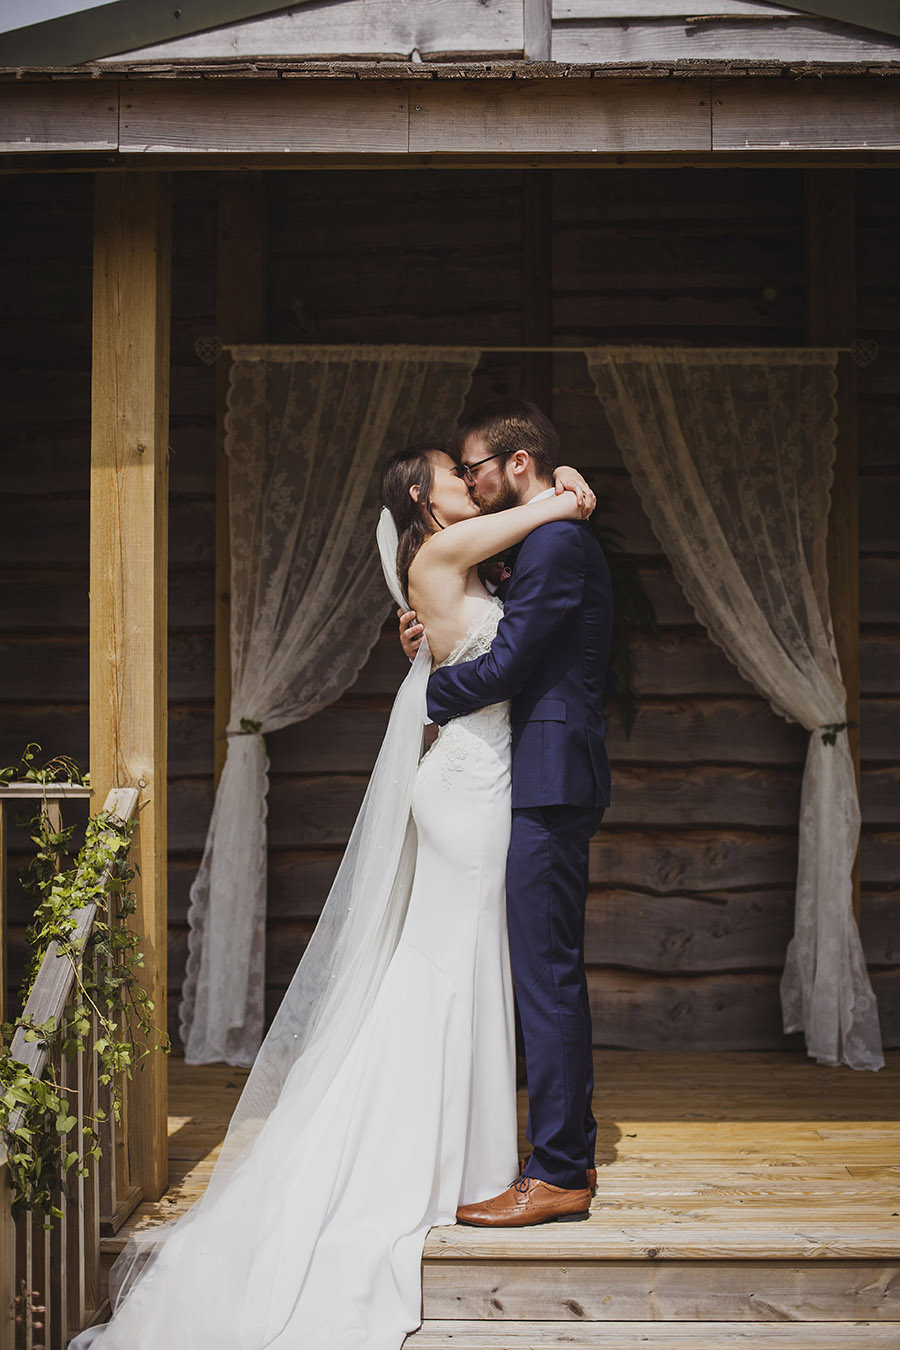 Relaxed outdoor wedding at Cott Farm Barn with images by Heather Birnie Photography on the English Wedding Blog (22)